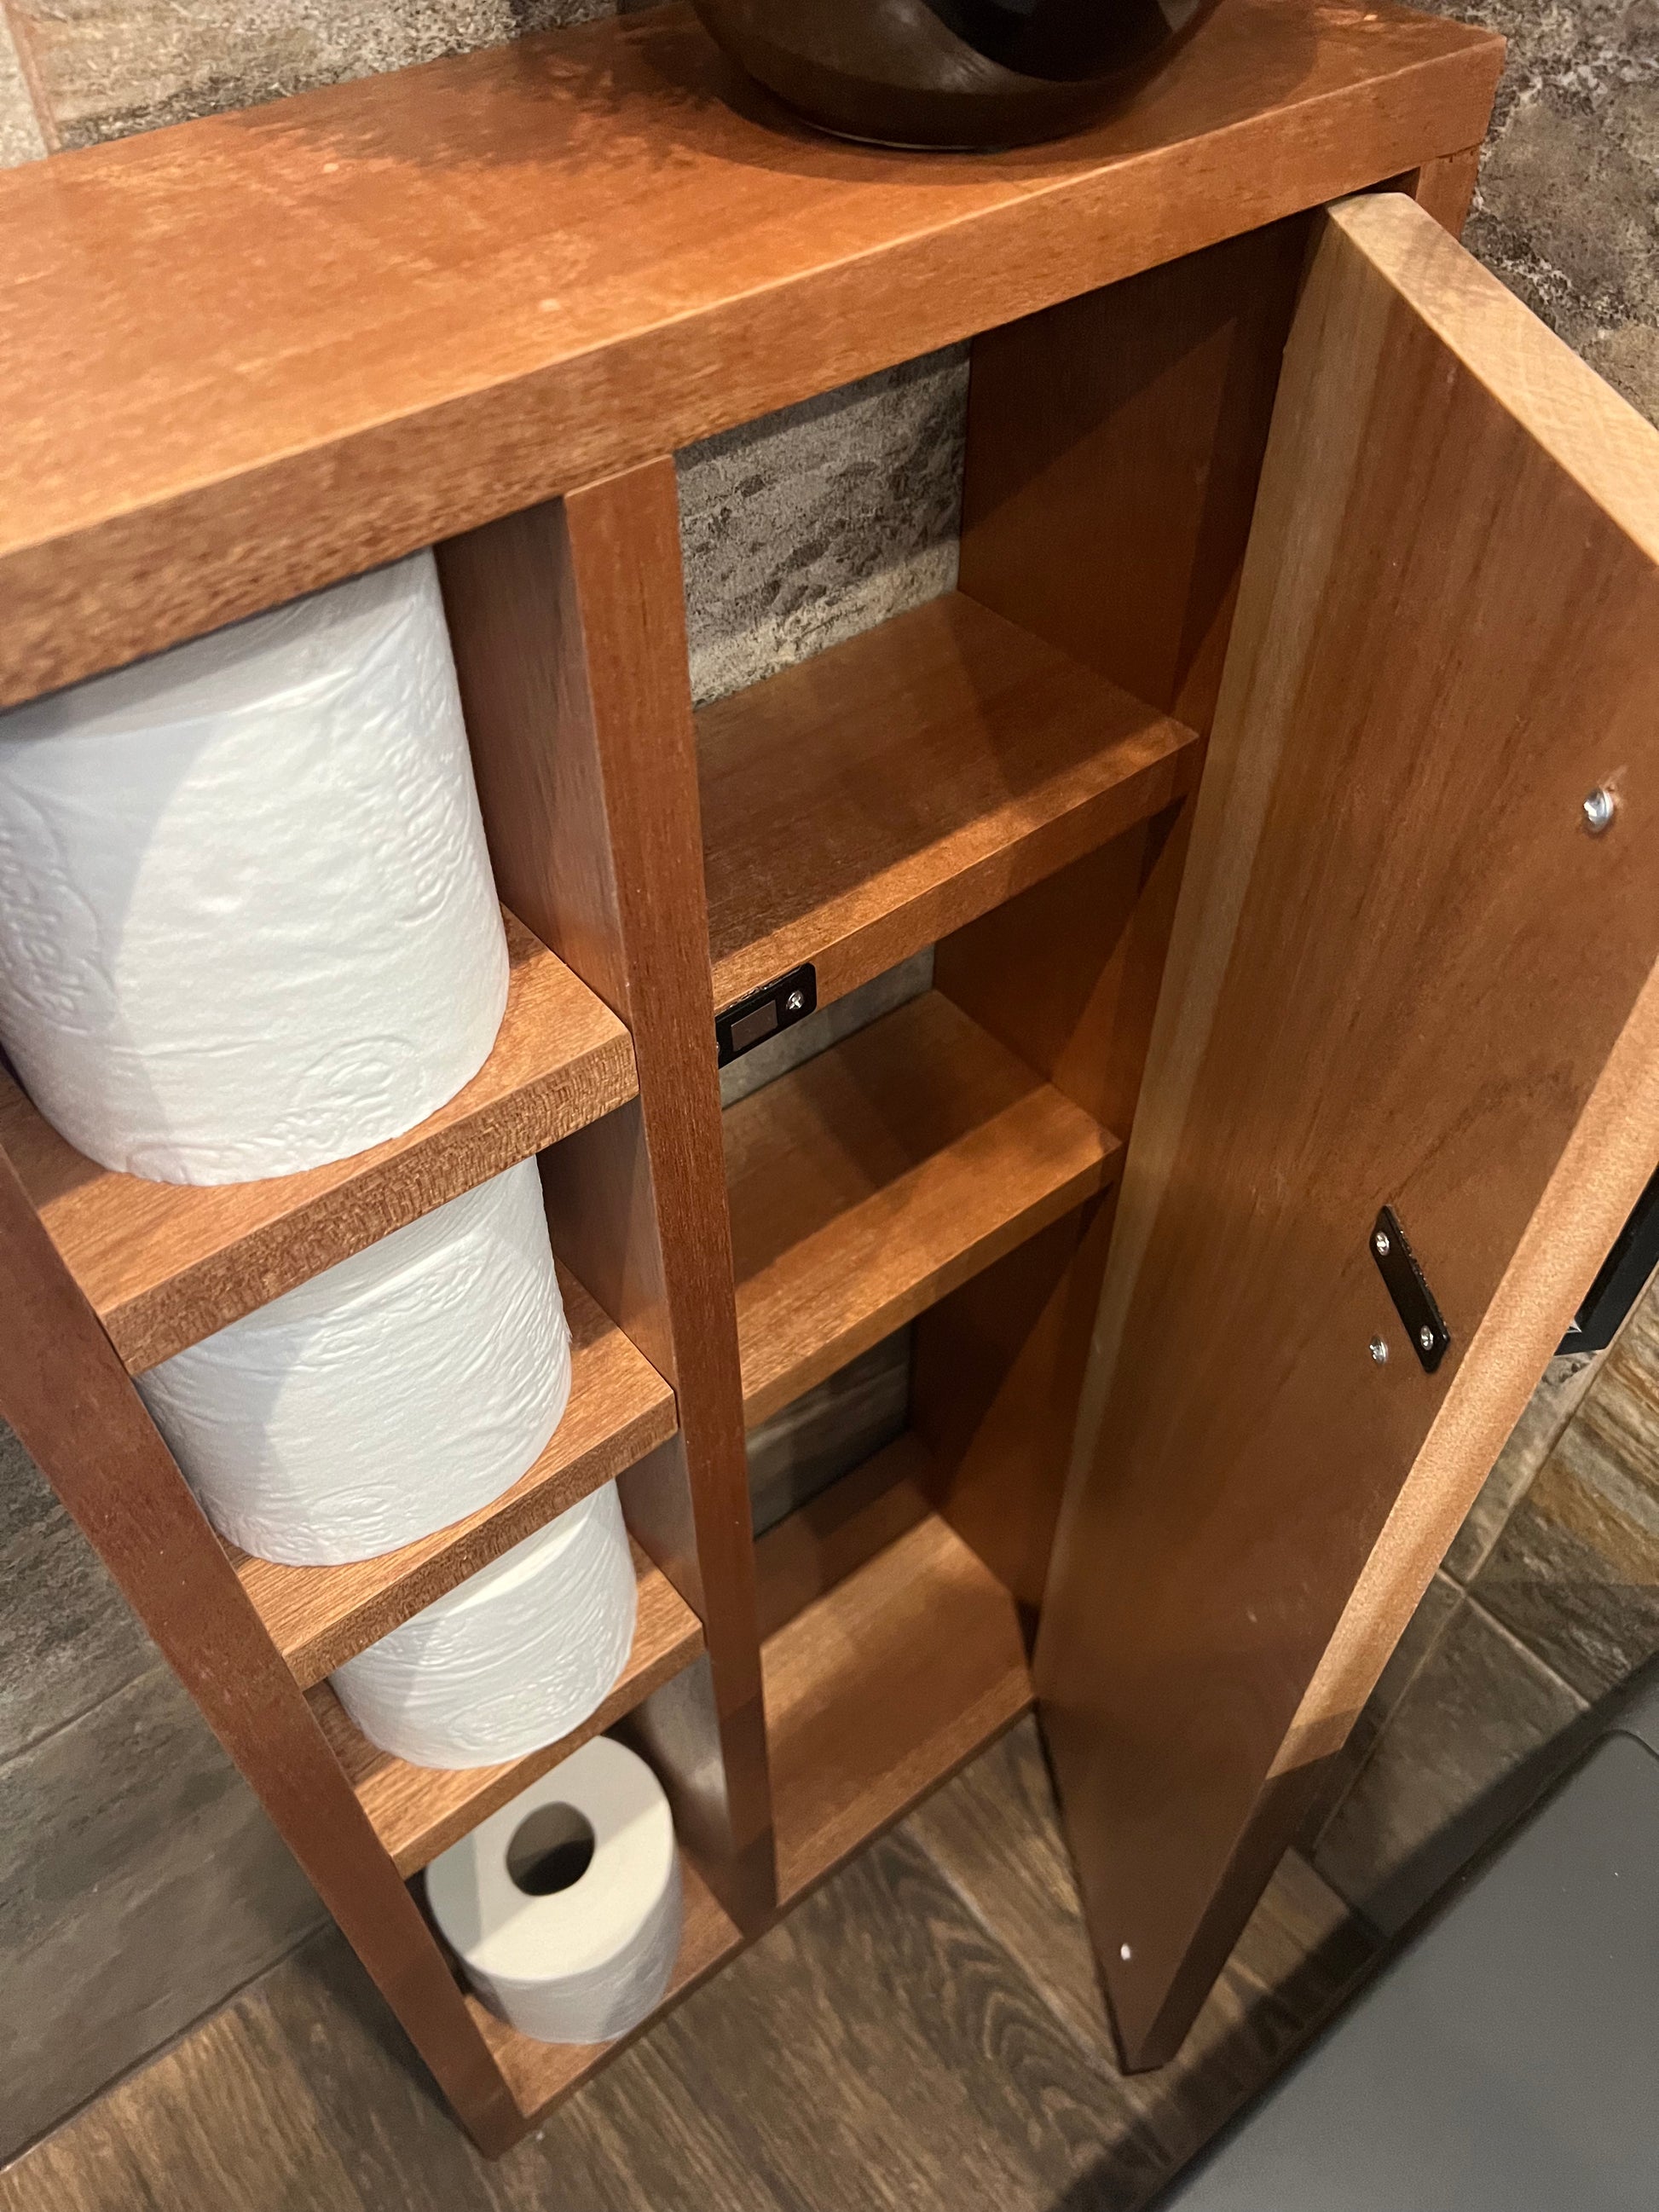 Toilet Paper Holder Storage Wall Mount Shelf Wc Roll Floating Wood